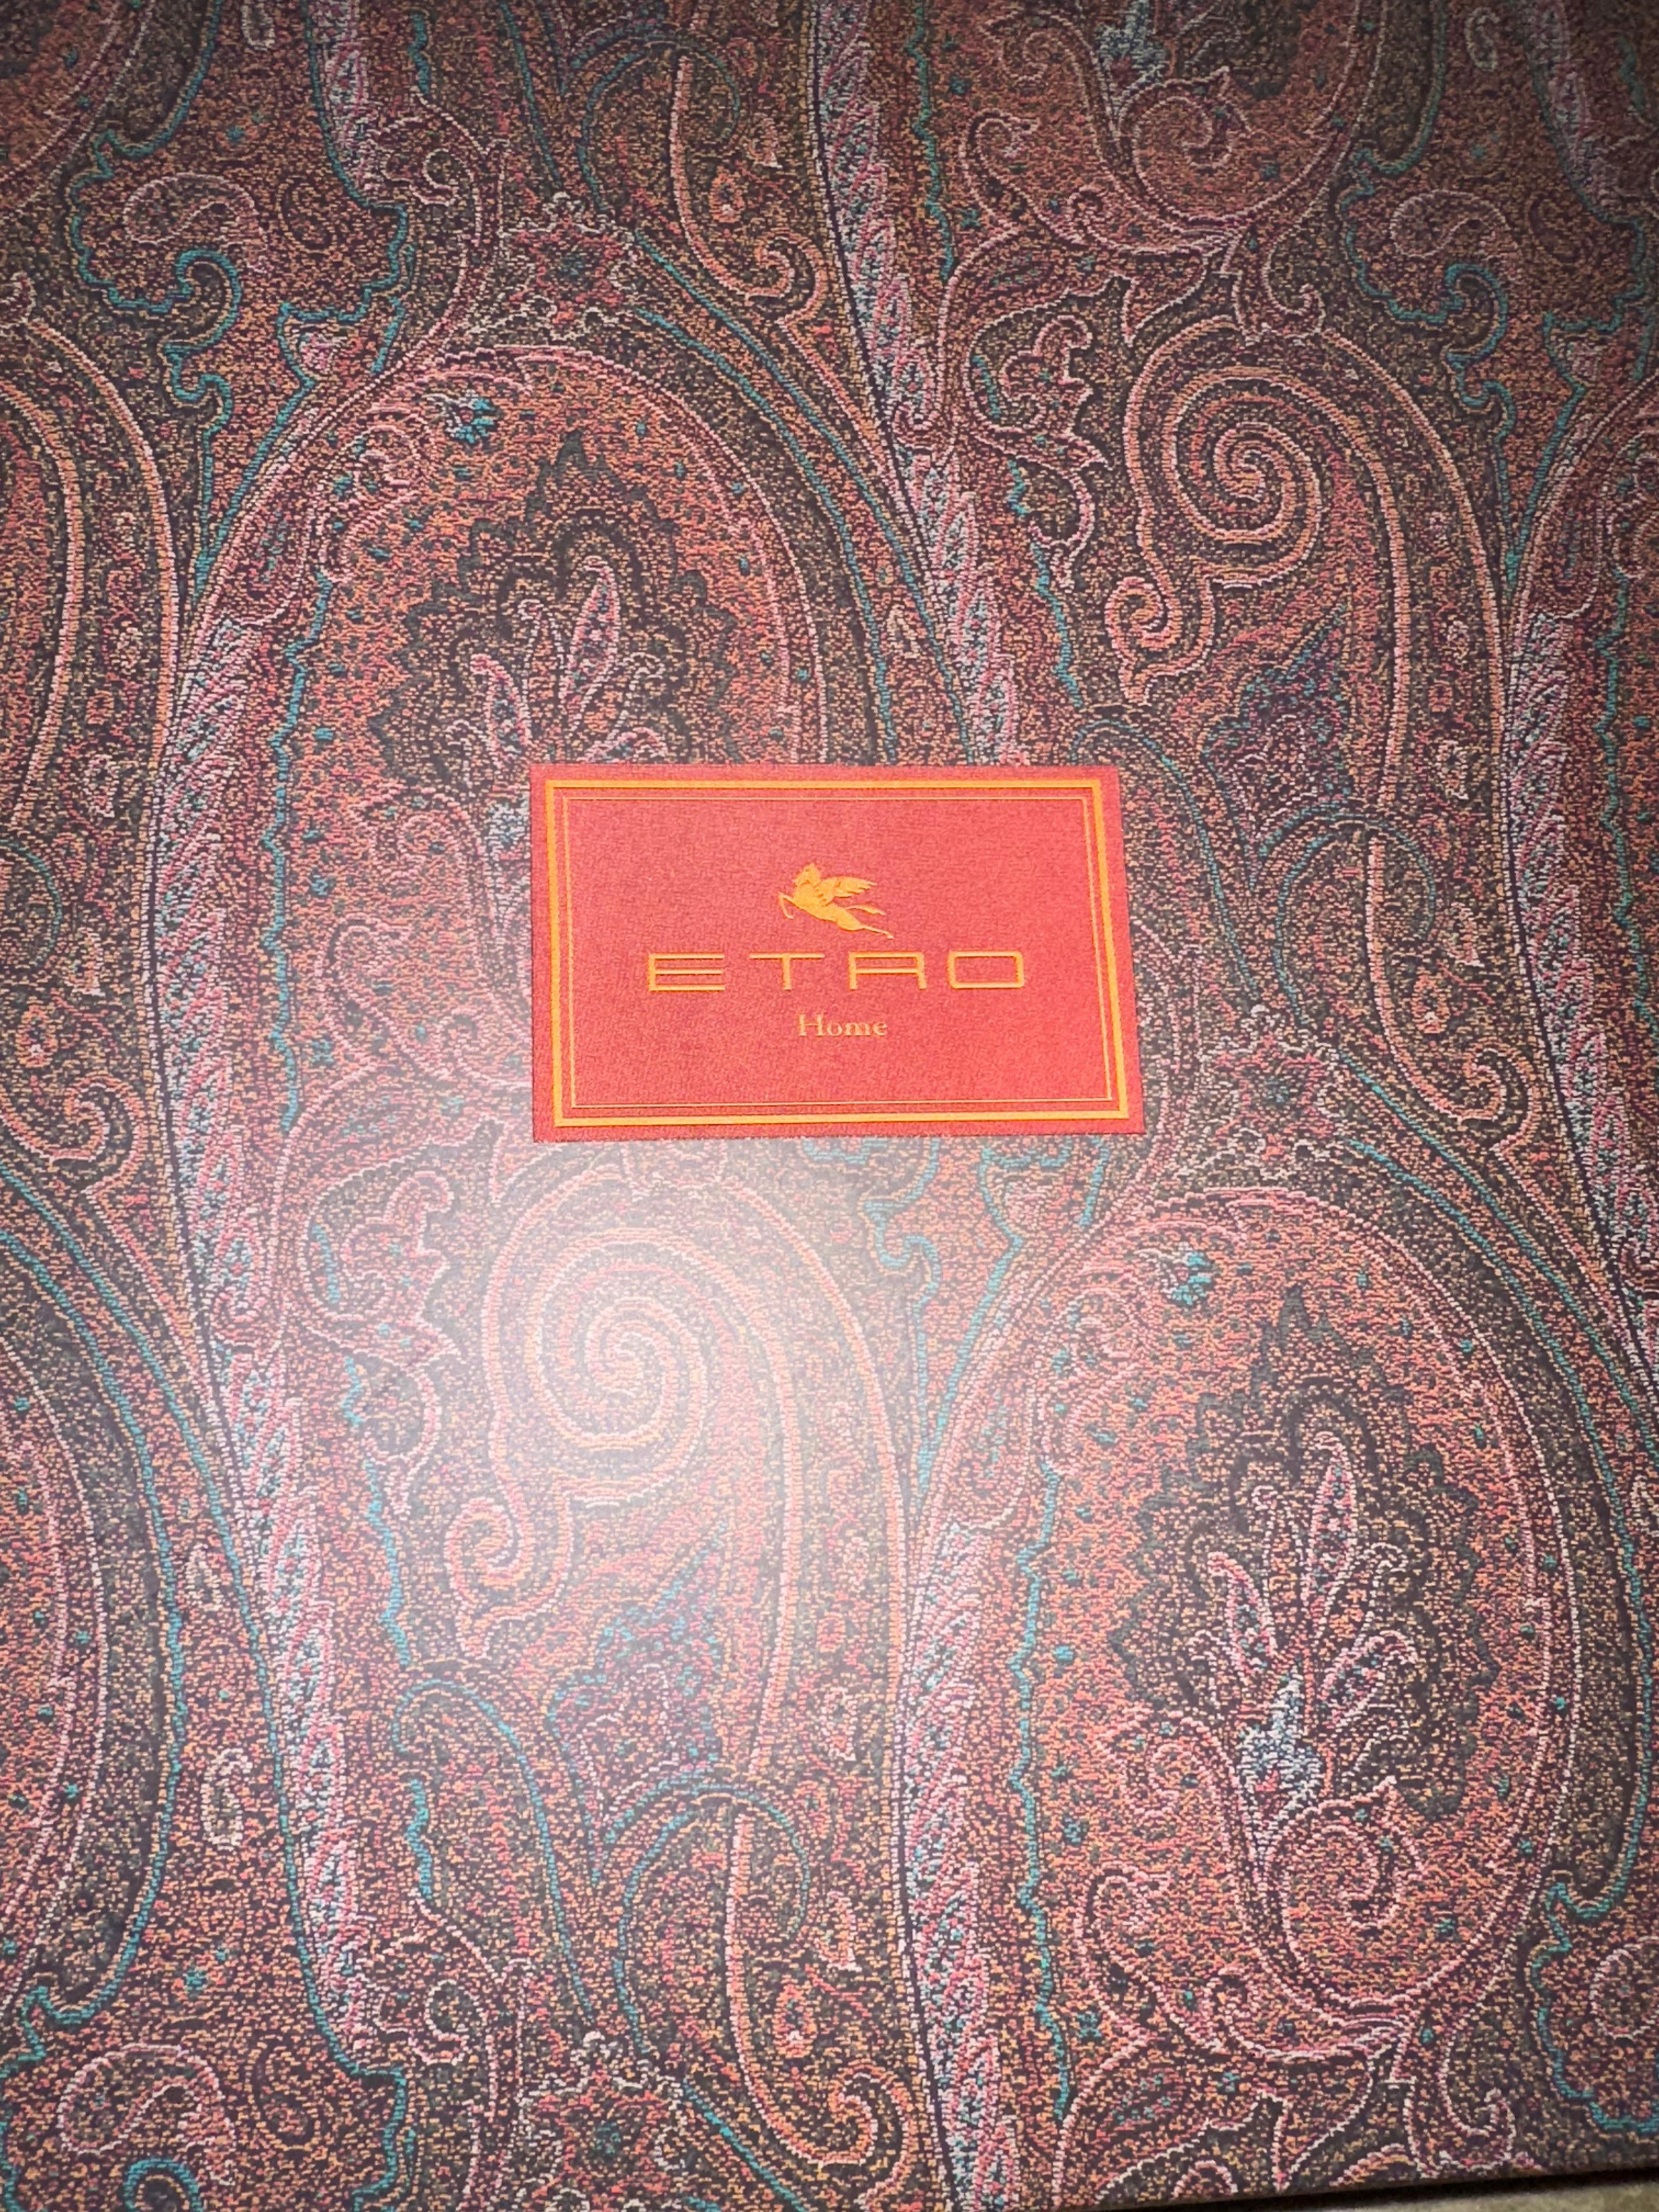 Etro Bani Silk Throw, Chestnut Brown, New in Box, Italy In New Condition For Sale In Brooklyn, NY